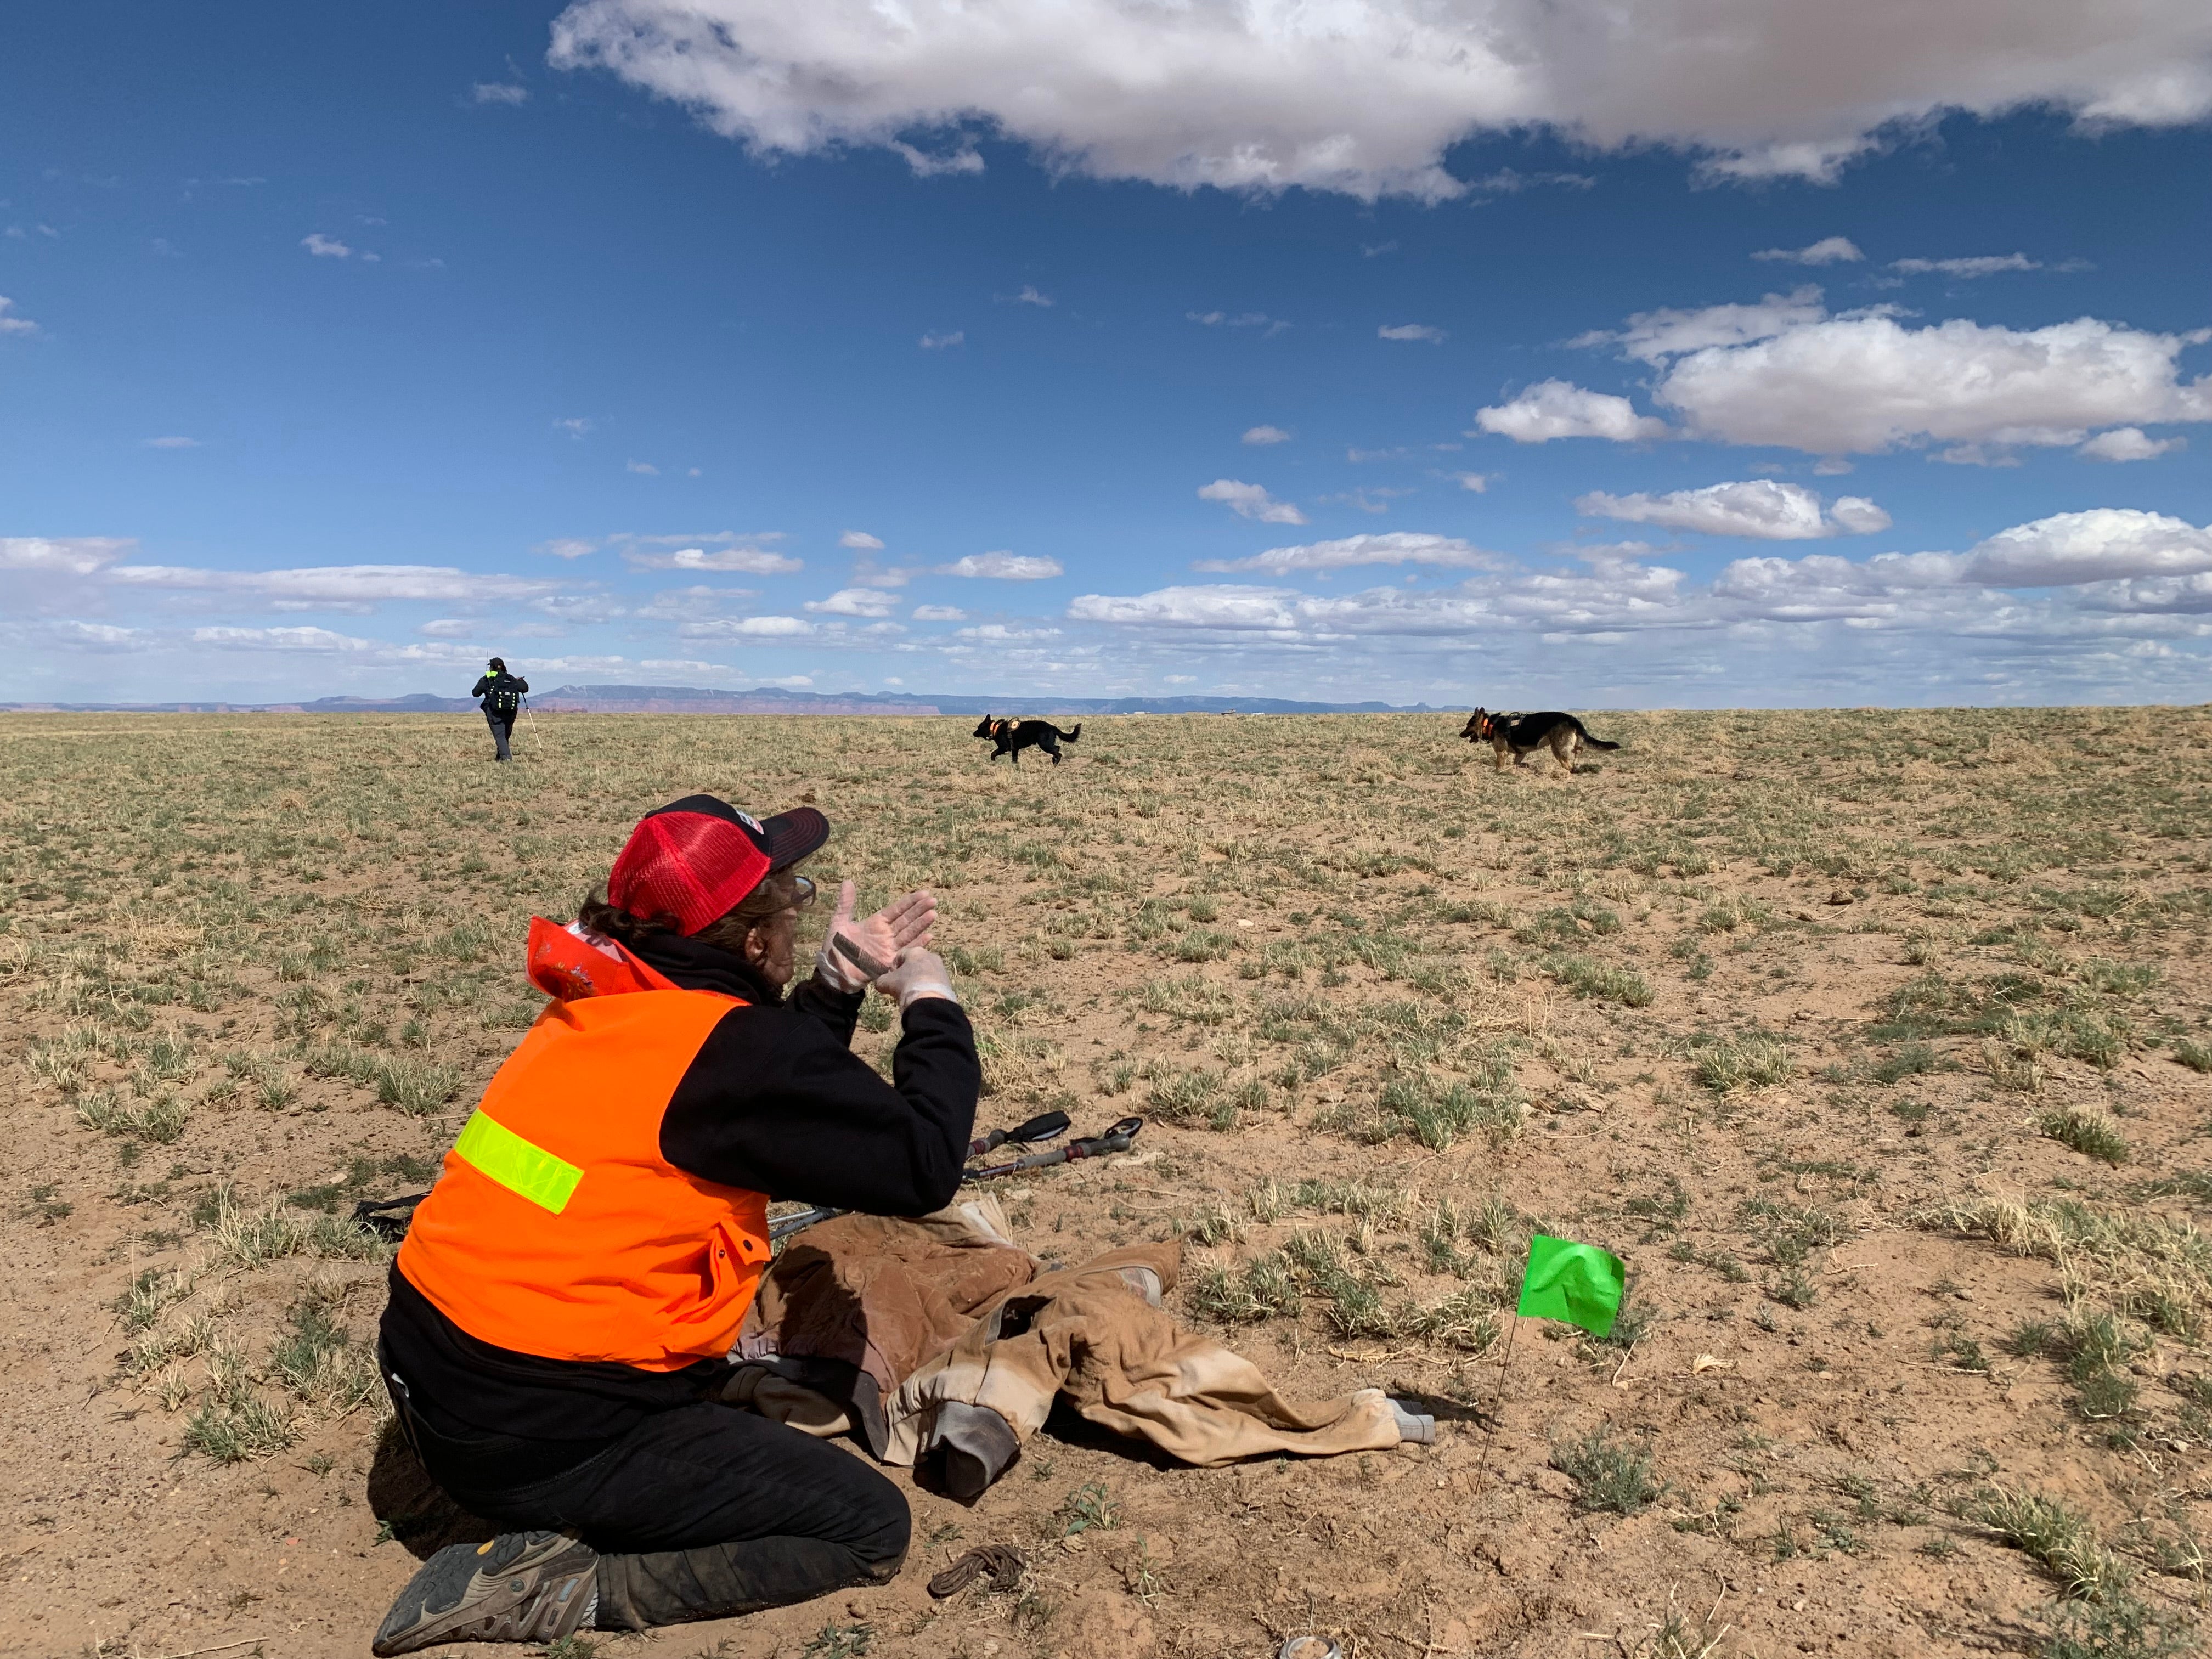 Volunteers with Four Corners K9 Search and Rescue are seen during a search for a missing person on the Navajo Nation on 23 April 2022.